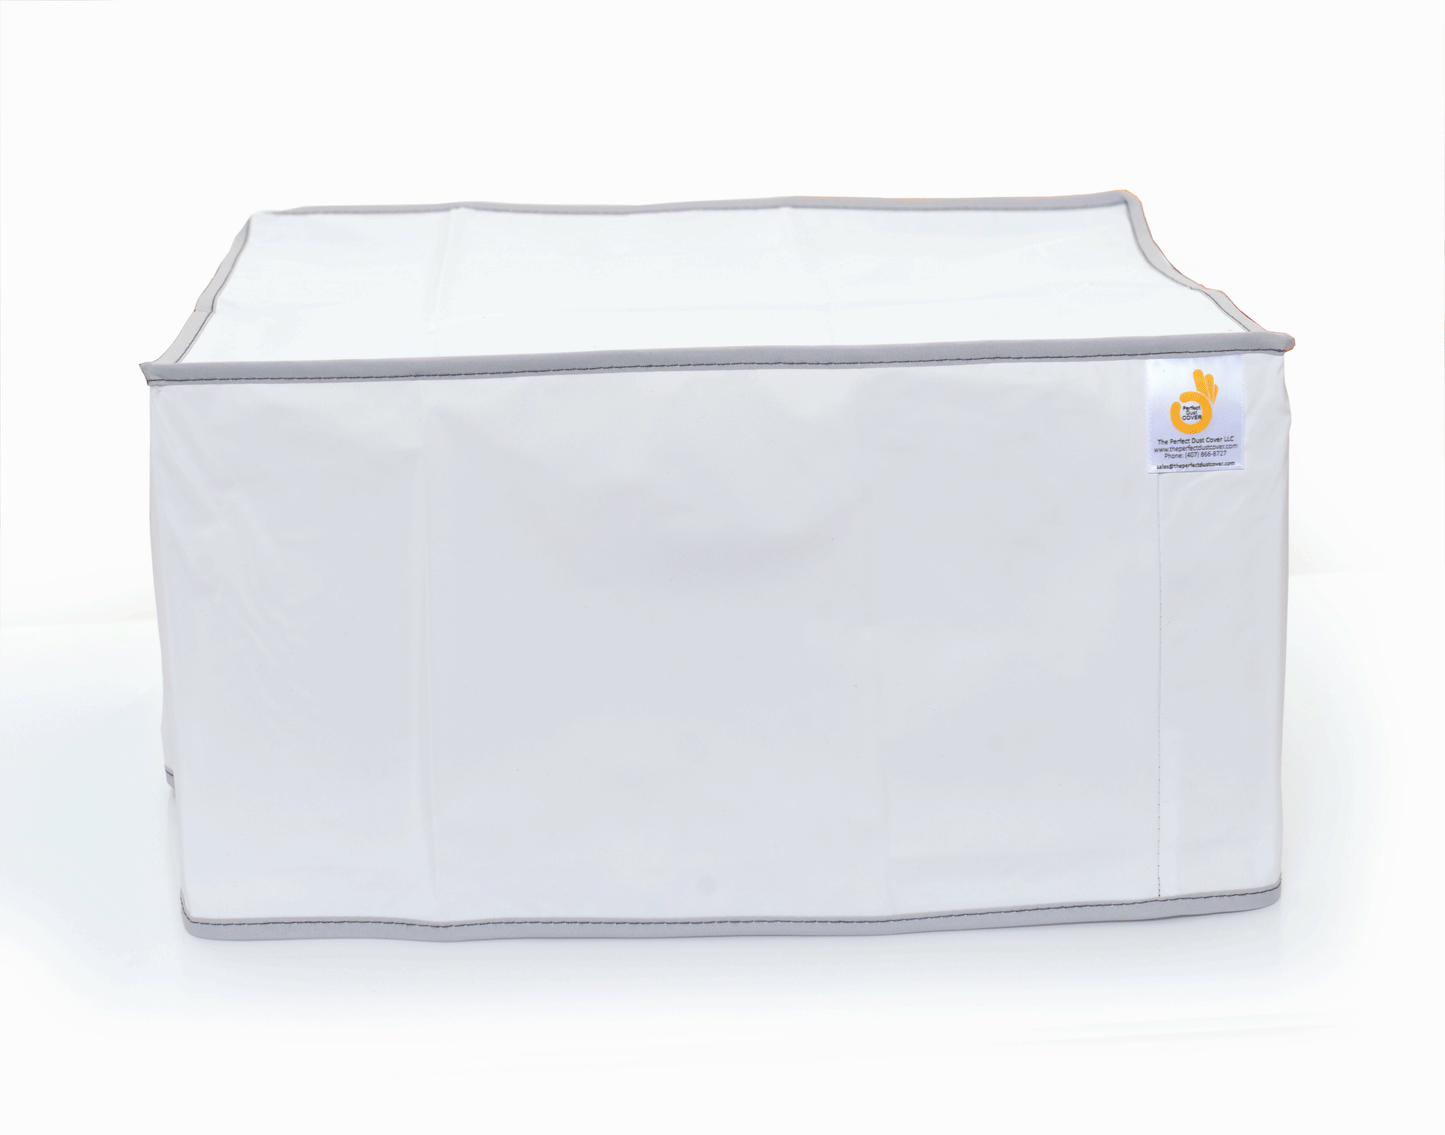 The Perfect Dust Cover, White Nylon Cover Compatible with HP Smart Tank 7301 and HP Smart Tank 7602 Wireless All-in-One Printers, Anti-Static and Waterproof Dust Cover by The Perfect Dust Cover LLC